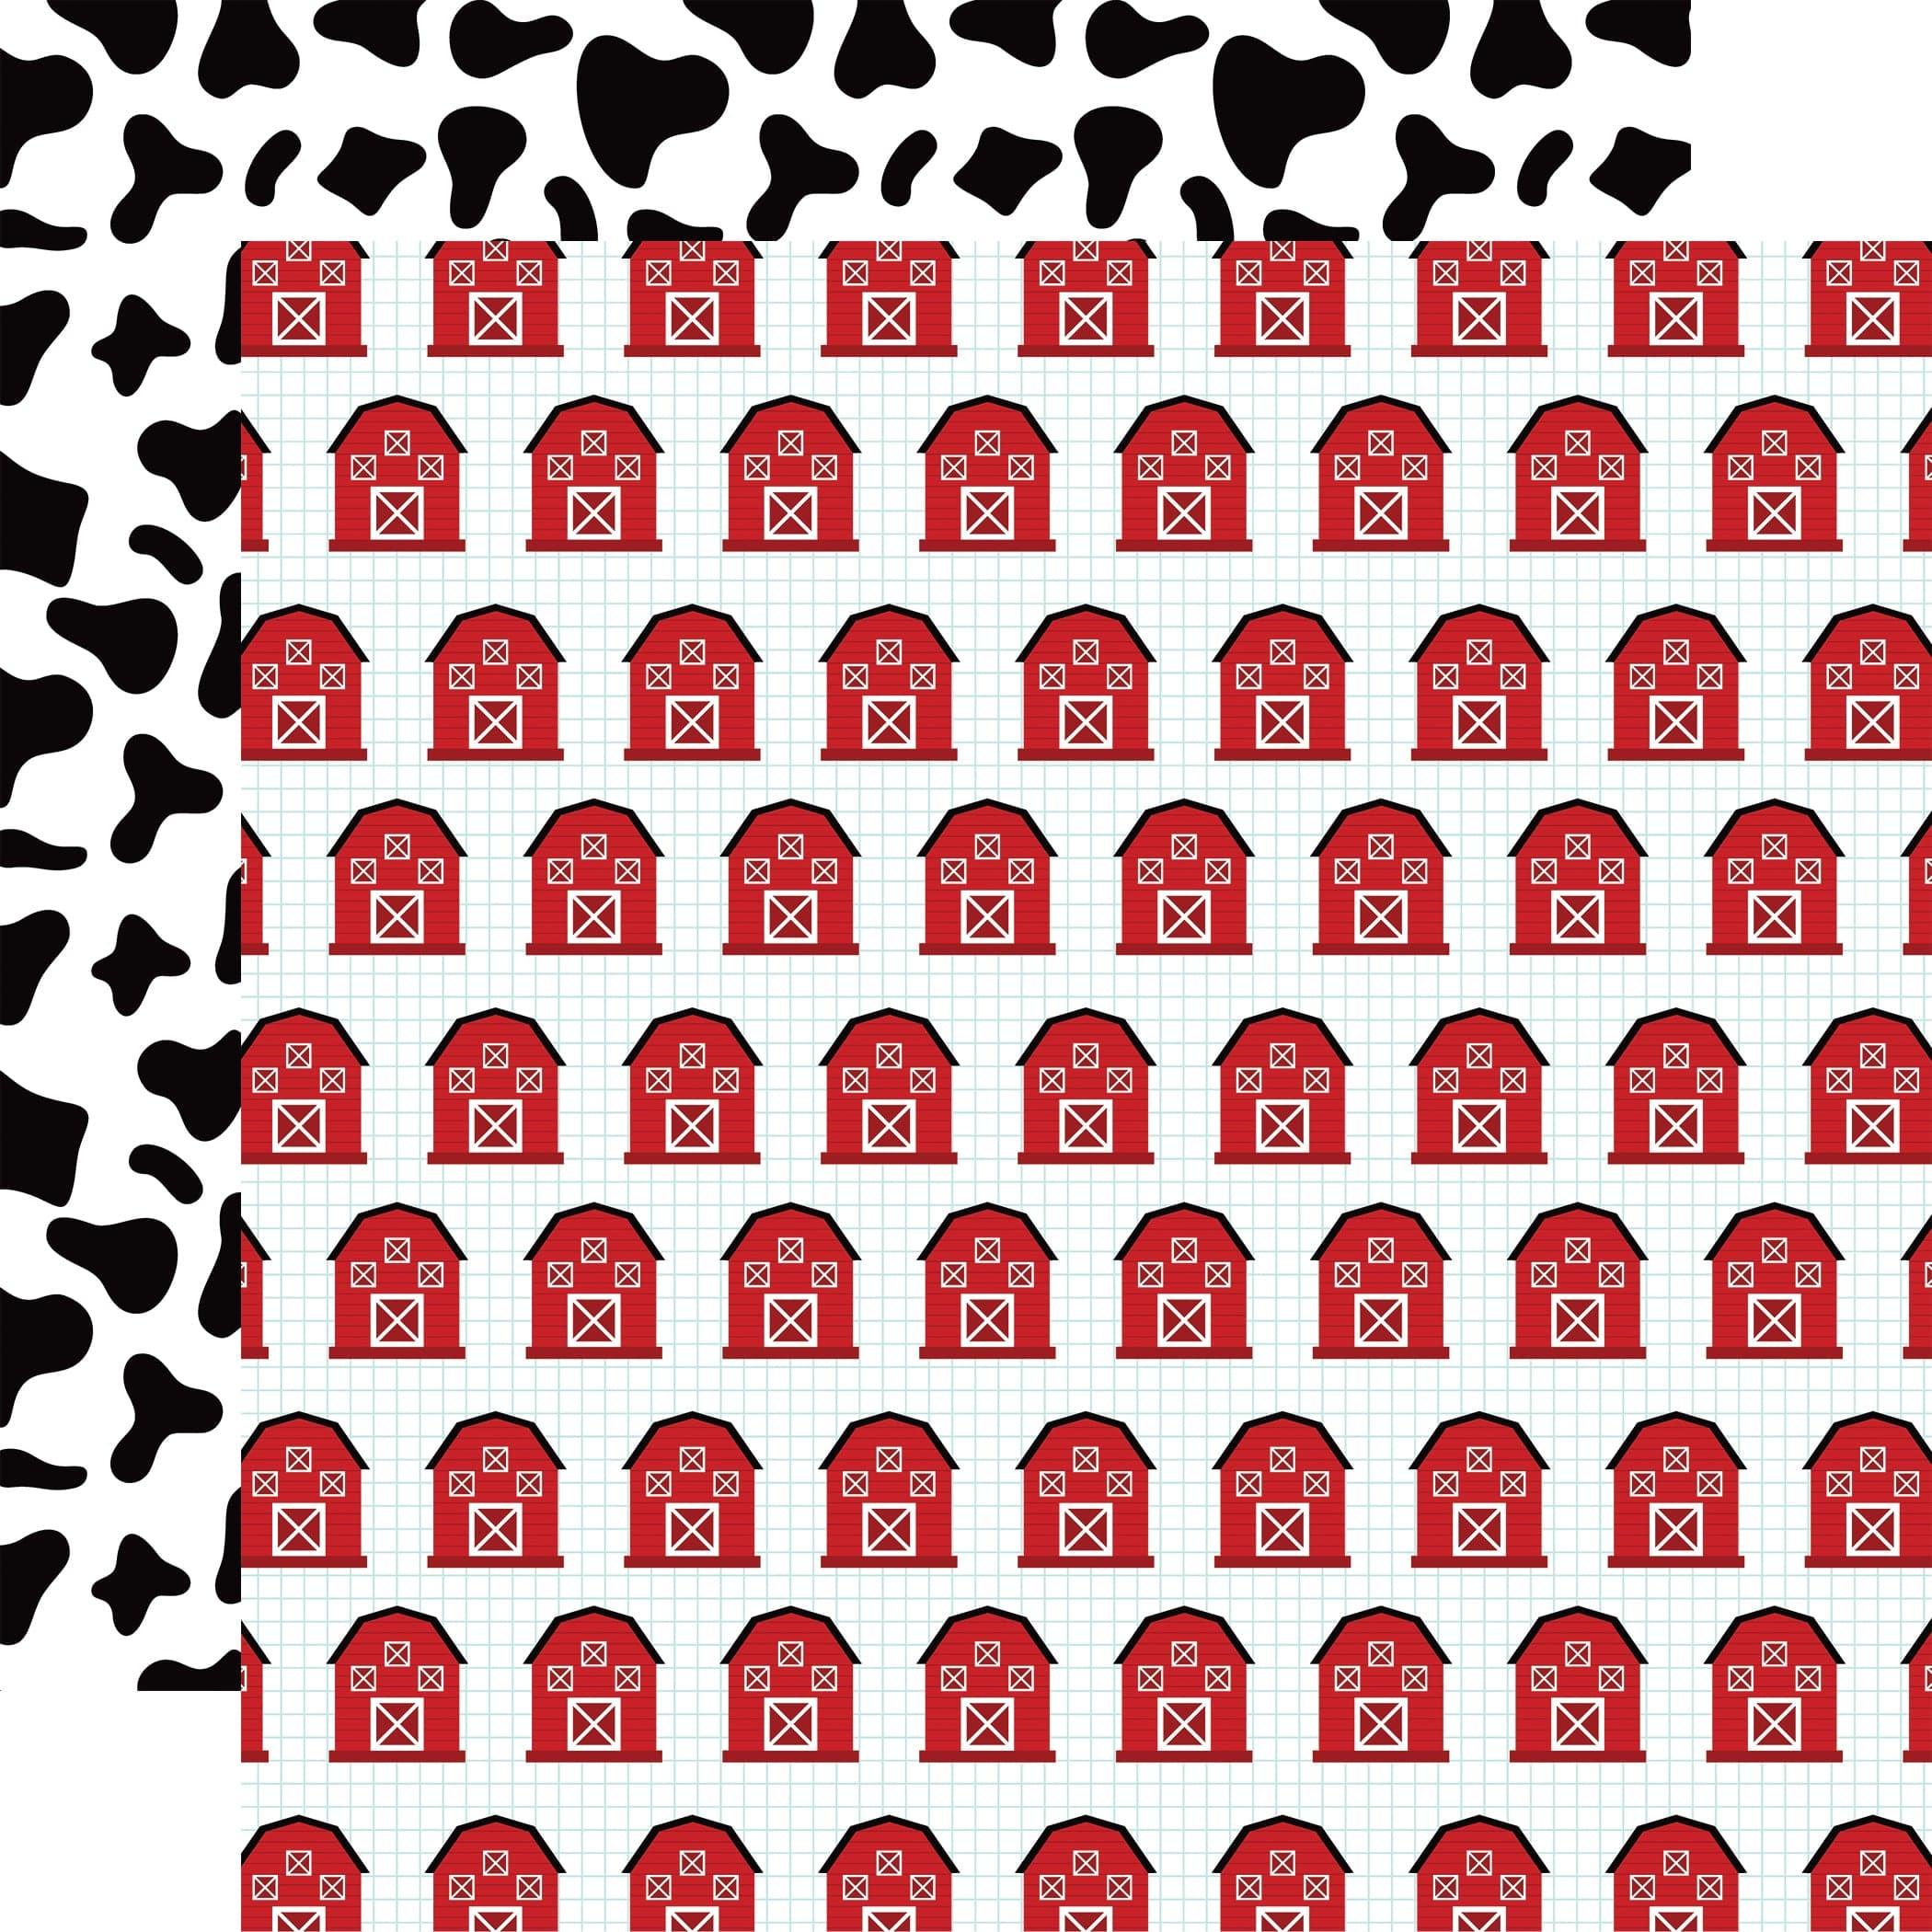 Fun On The Farm Collection Red Barns 12 x 12 Double-Sided Scrapbook Paper by Echo Park Paper - Scrapbook Supply Companies